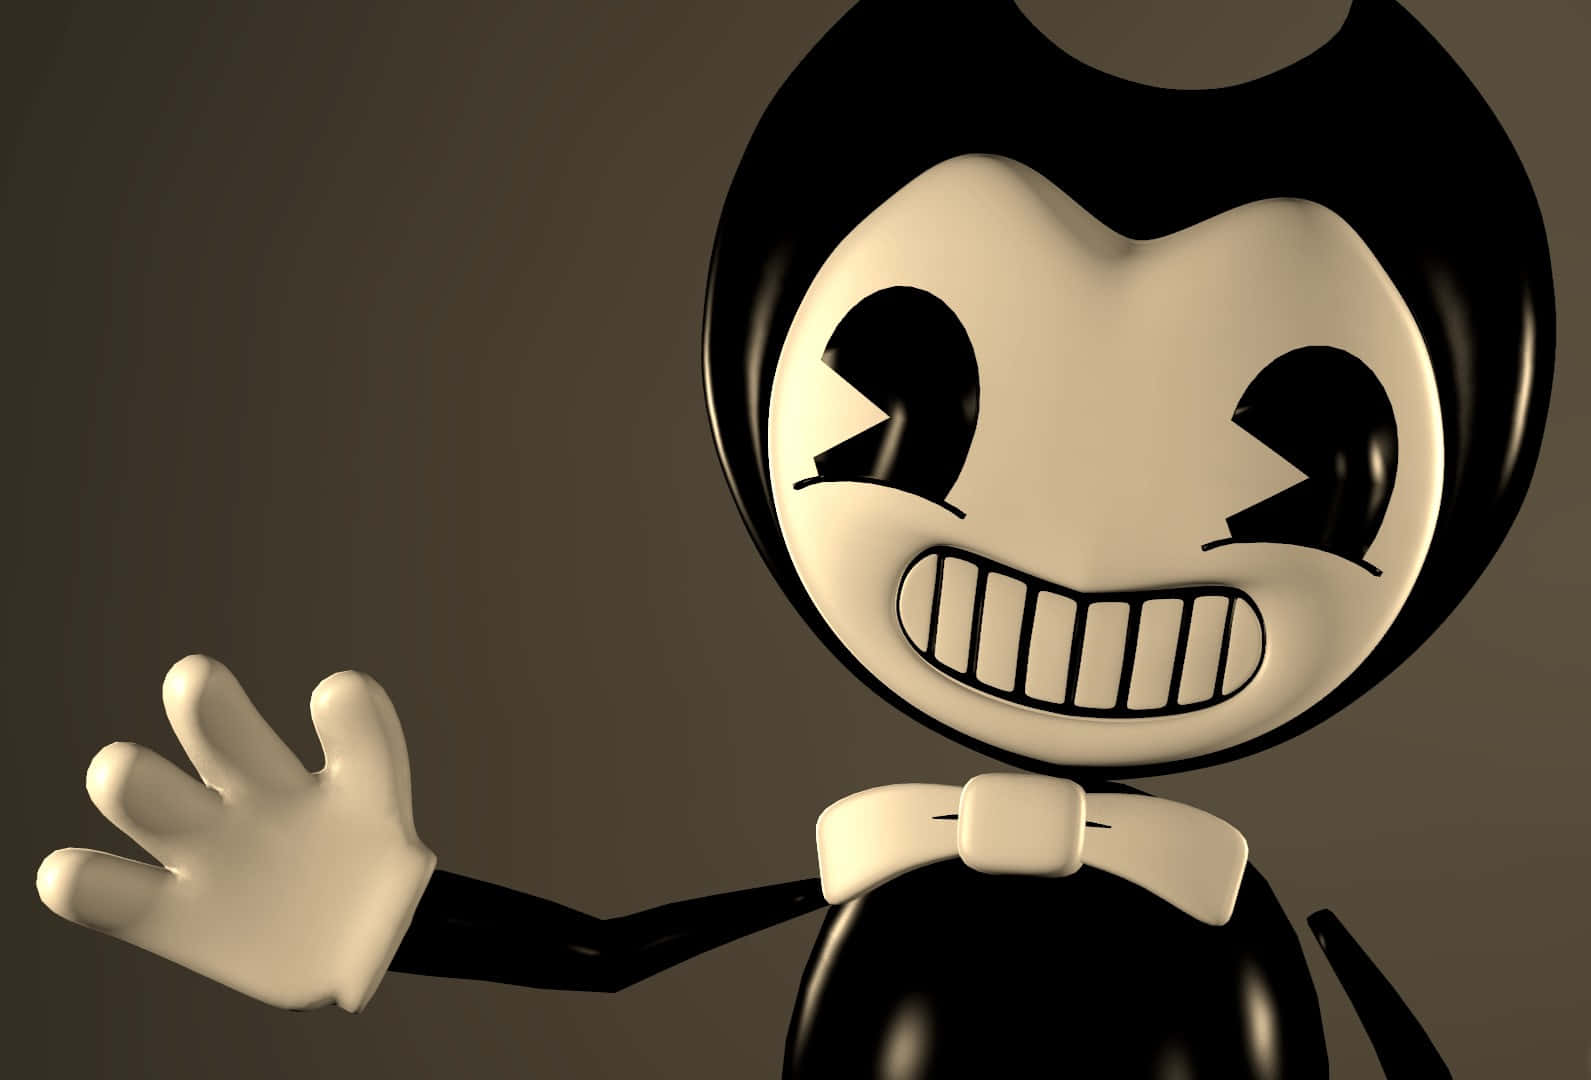 Bendy In Action - Hauntingly Creative